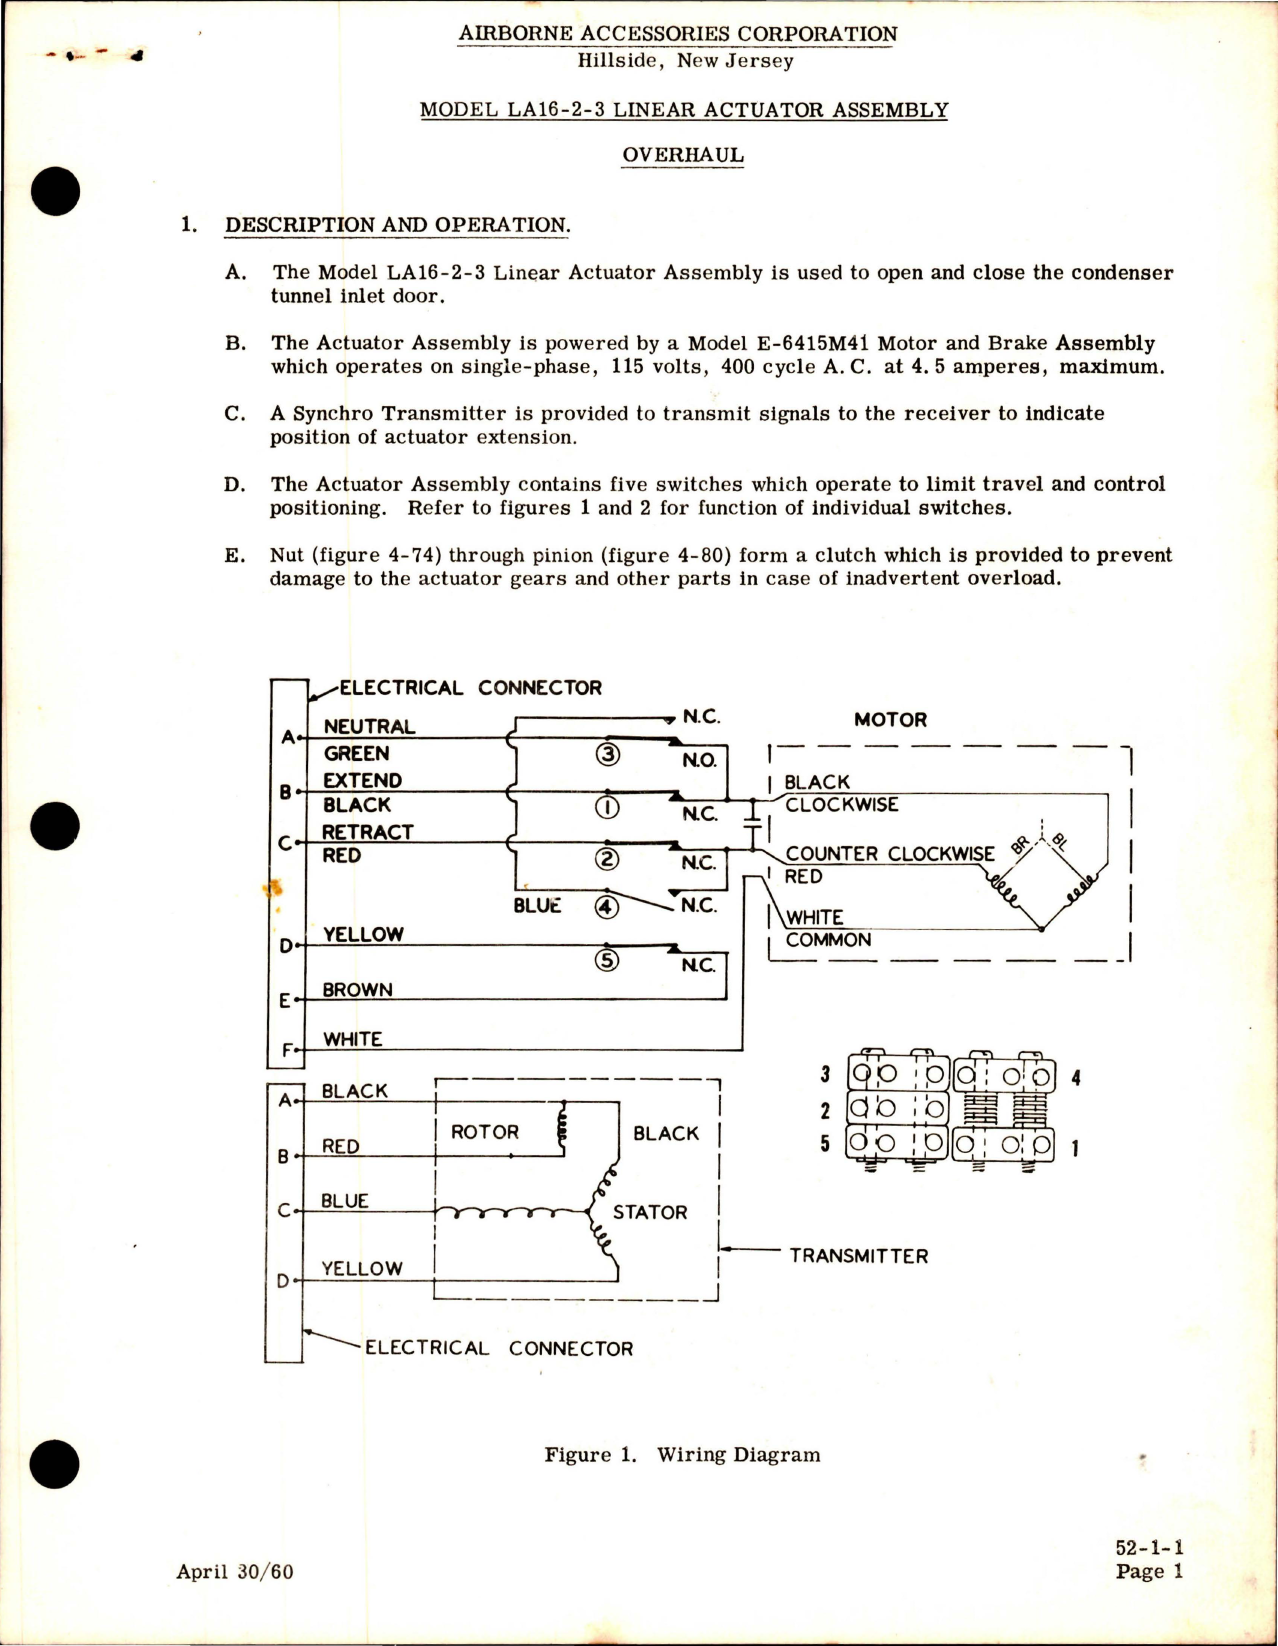 Sample page 1 from AirCorps Library document: Overhaul Instructions for Linear Actuator Assembly - Model LA16-2-3 